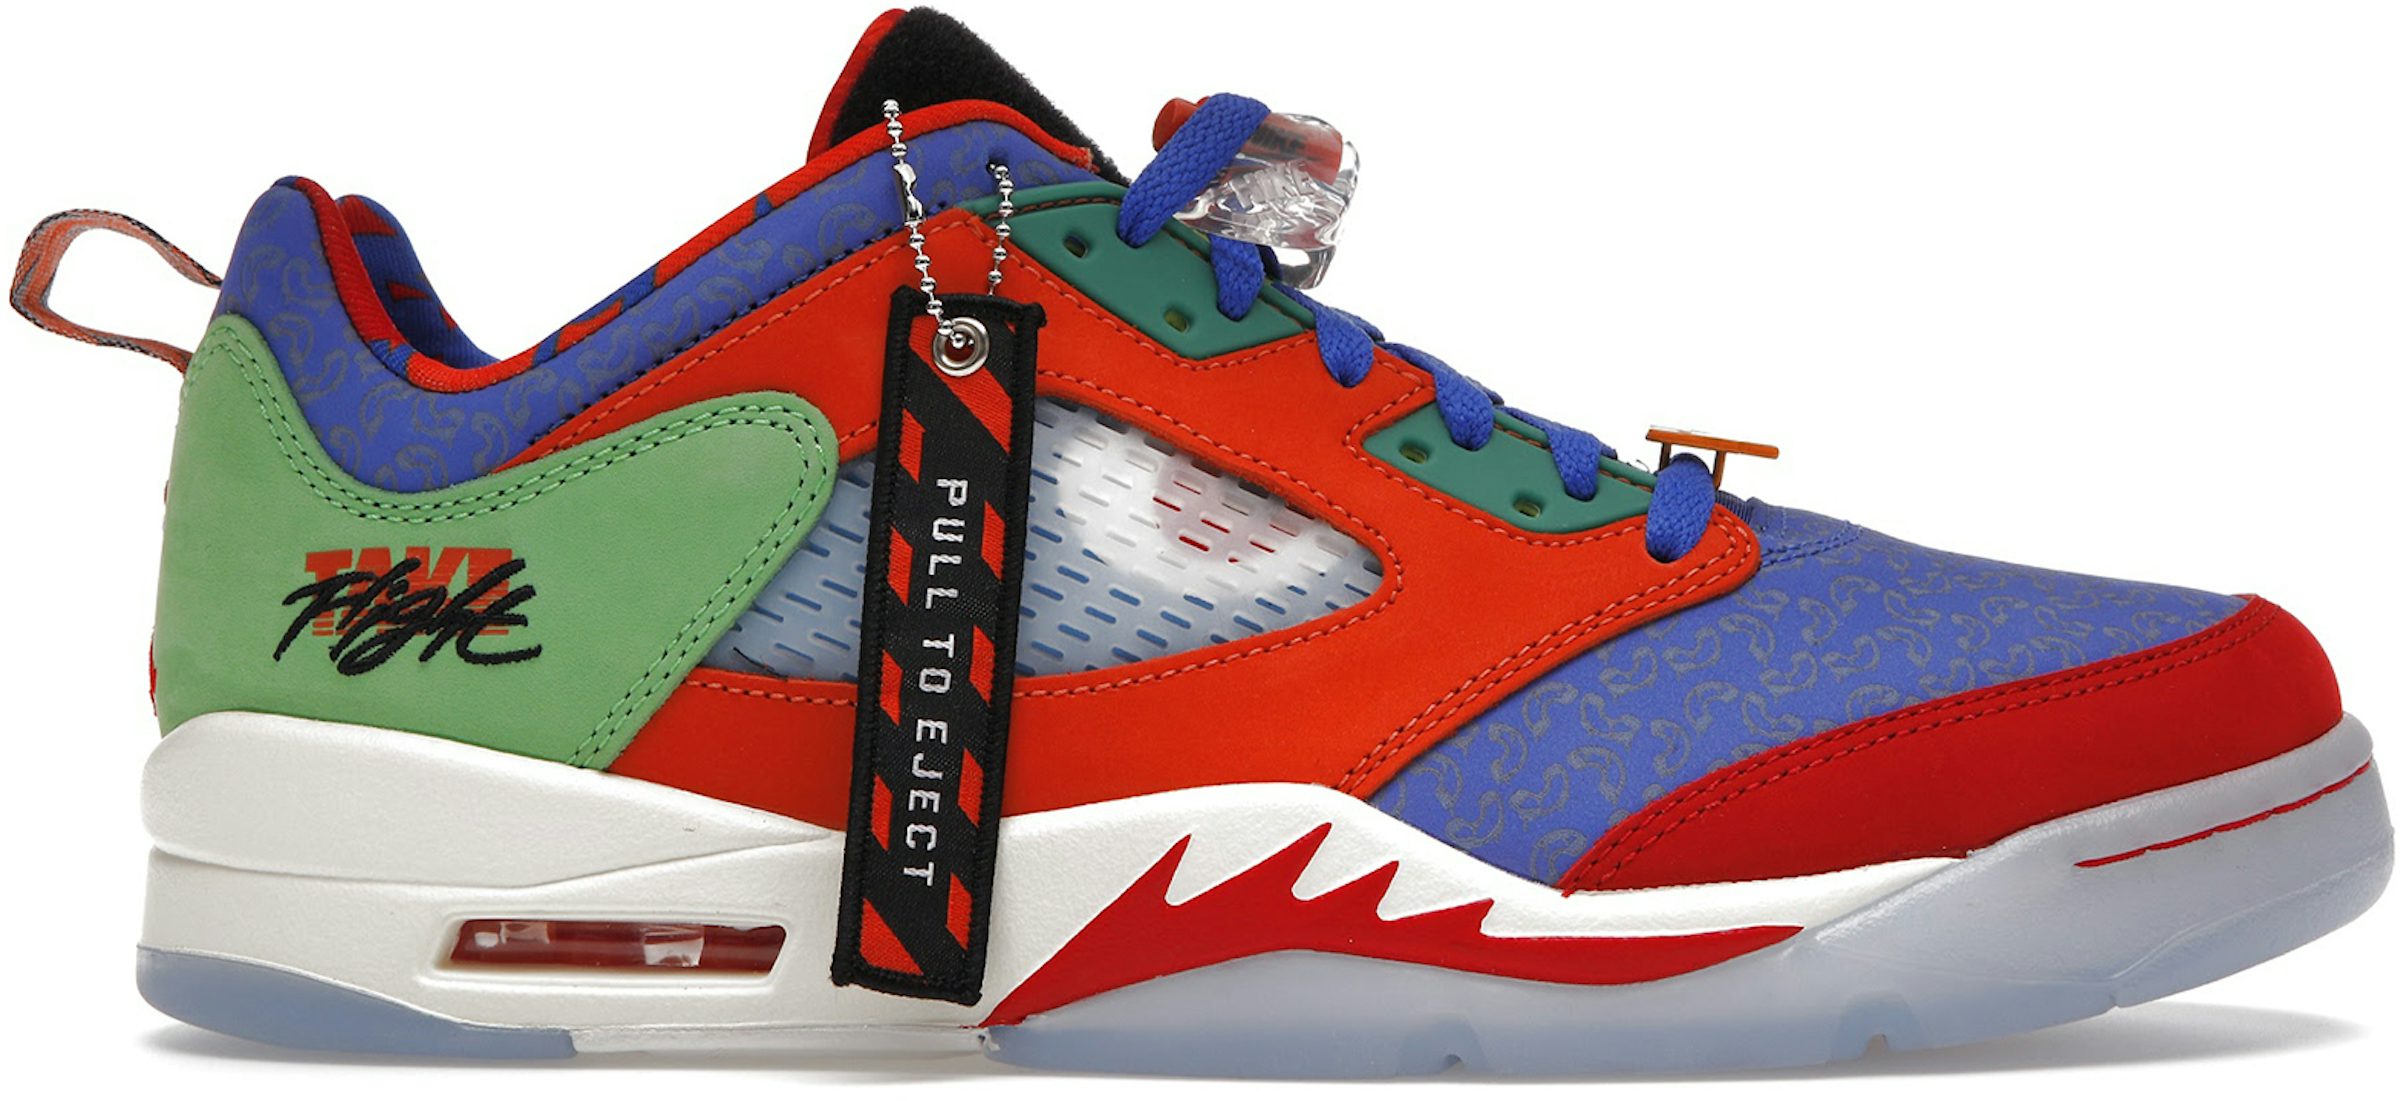 Nike Nike Air Jordan 5 Retro Doernbecher  Size 11 Available For Immediate  Sale At Sotheby's